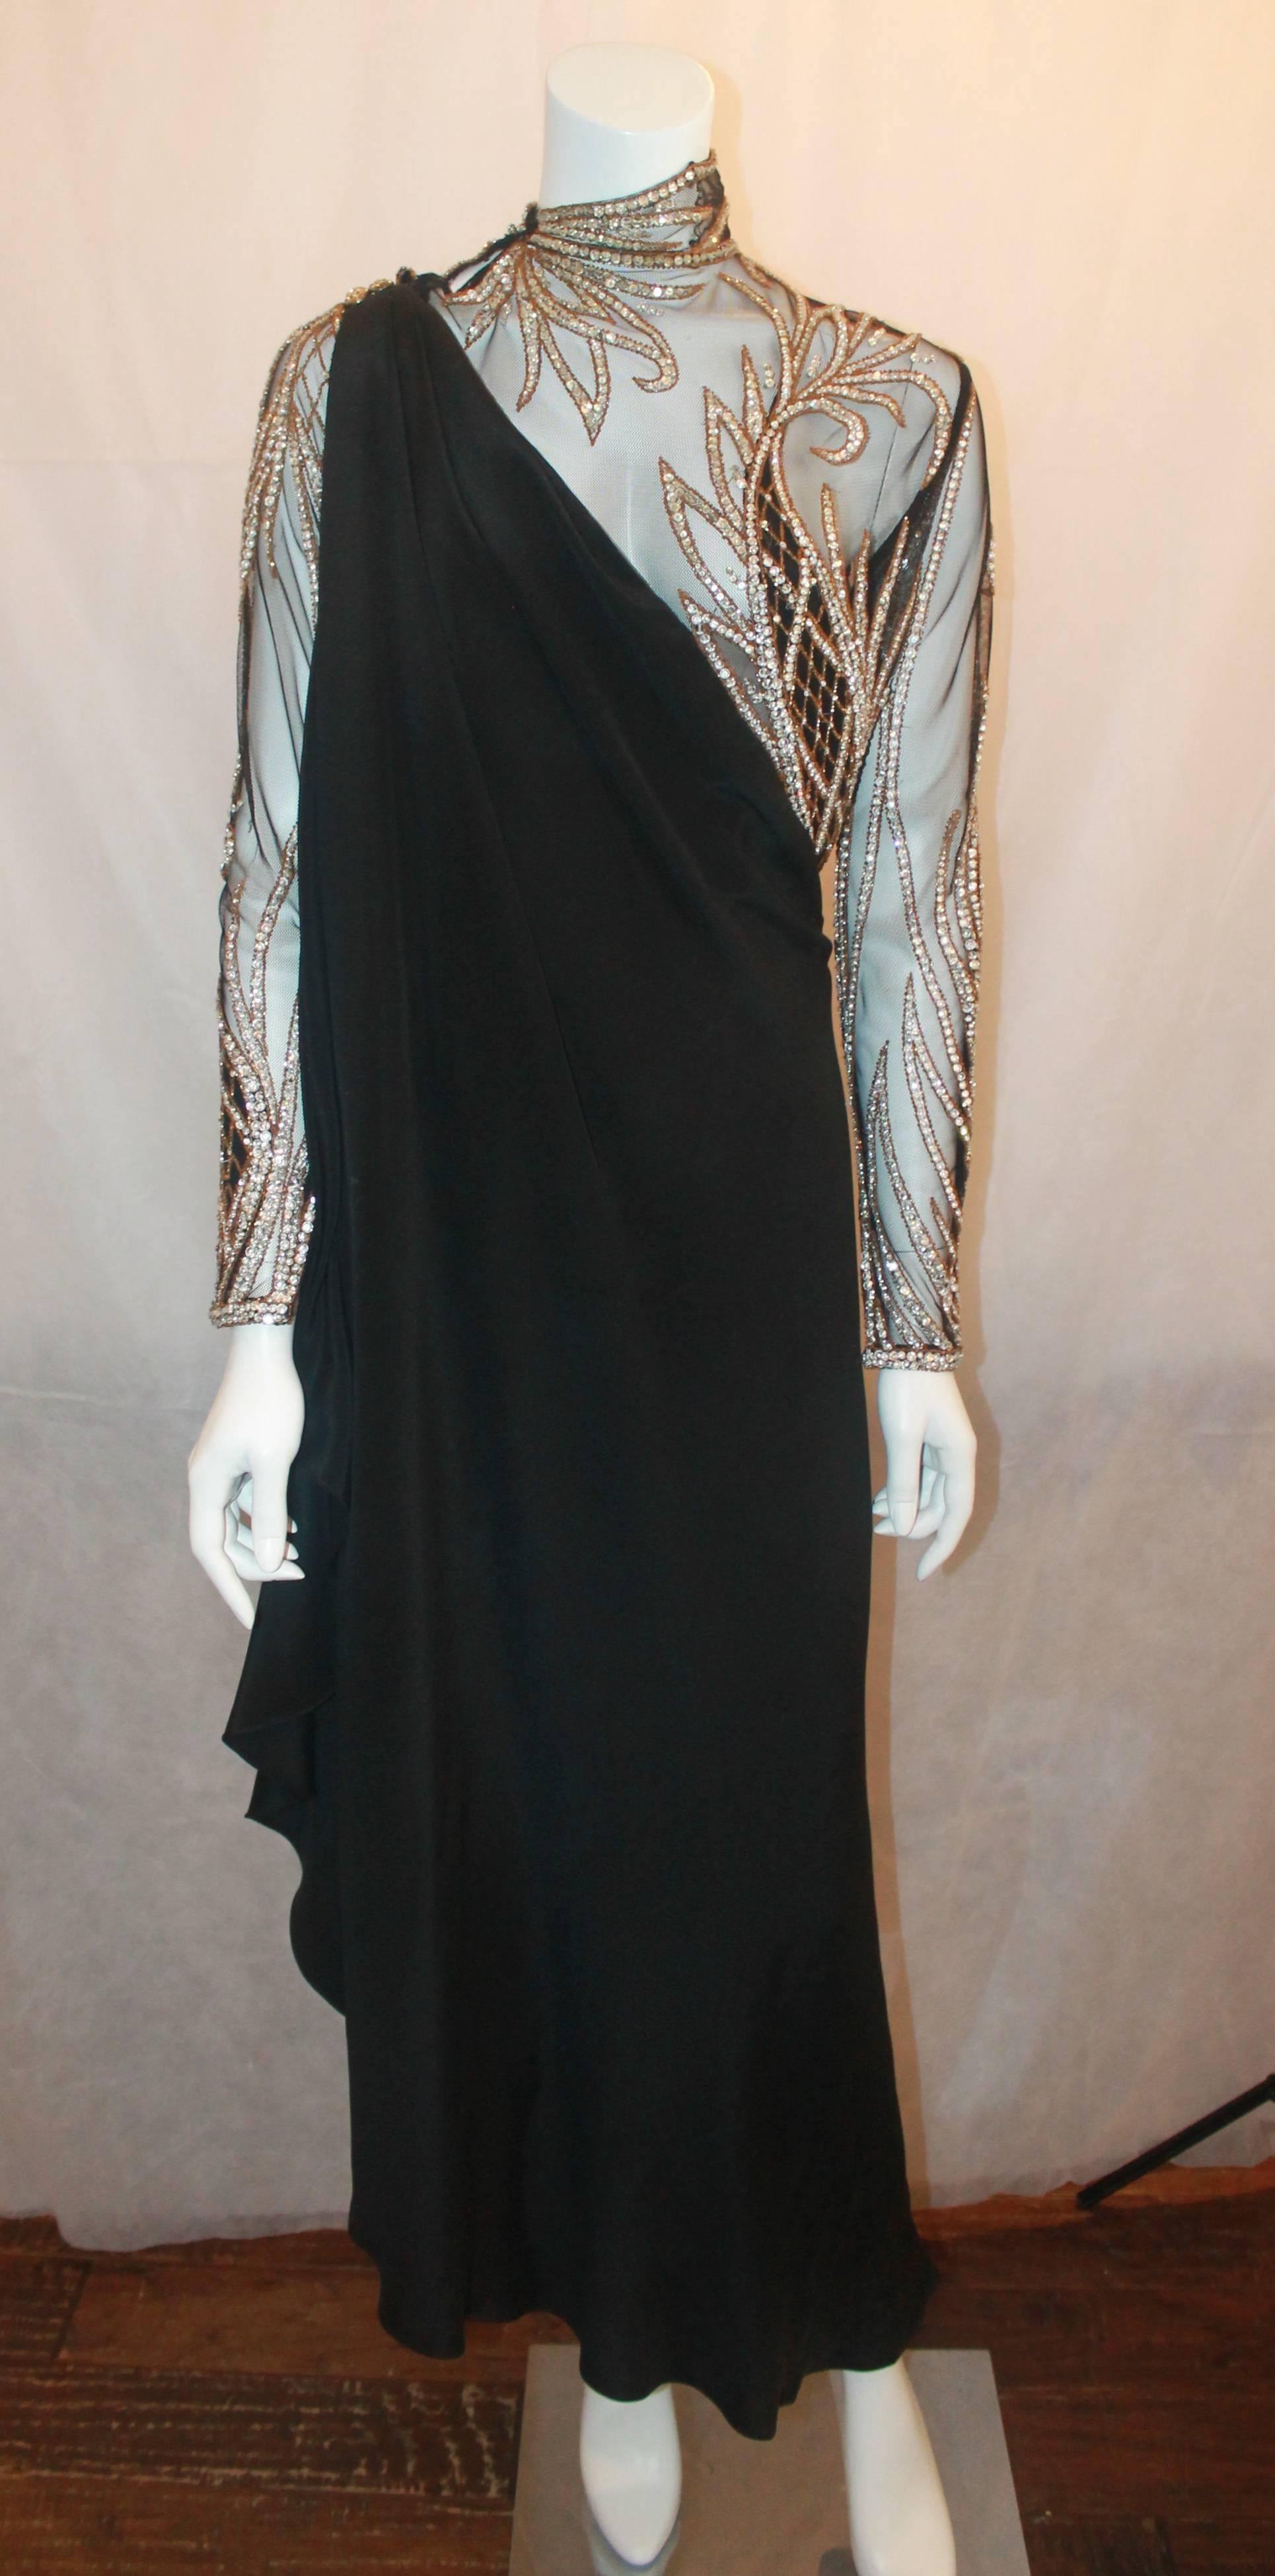 Bob Mackie Black & Gold Silk Jersey, Mesh, & Rhinestone Gown - M - Circa 1970's.  This incredible gown is in excellent vintage condition.  It features lovely black silk jersey and mesh materials.  It has intricate gold beading and clear sequins. 